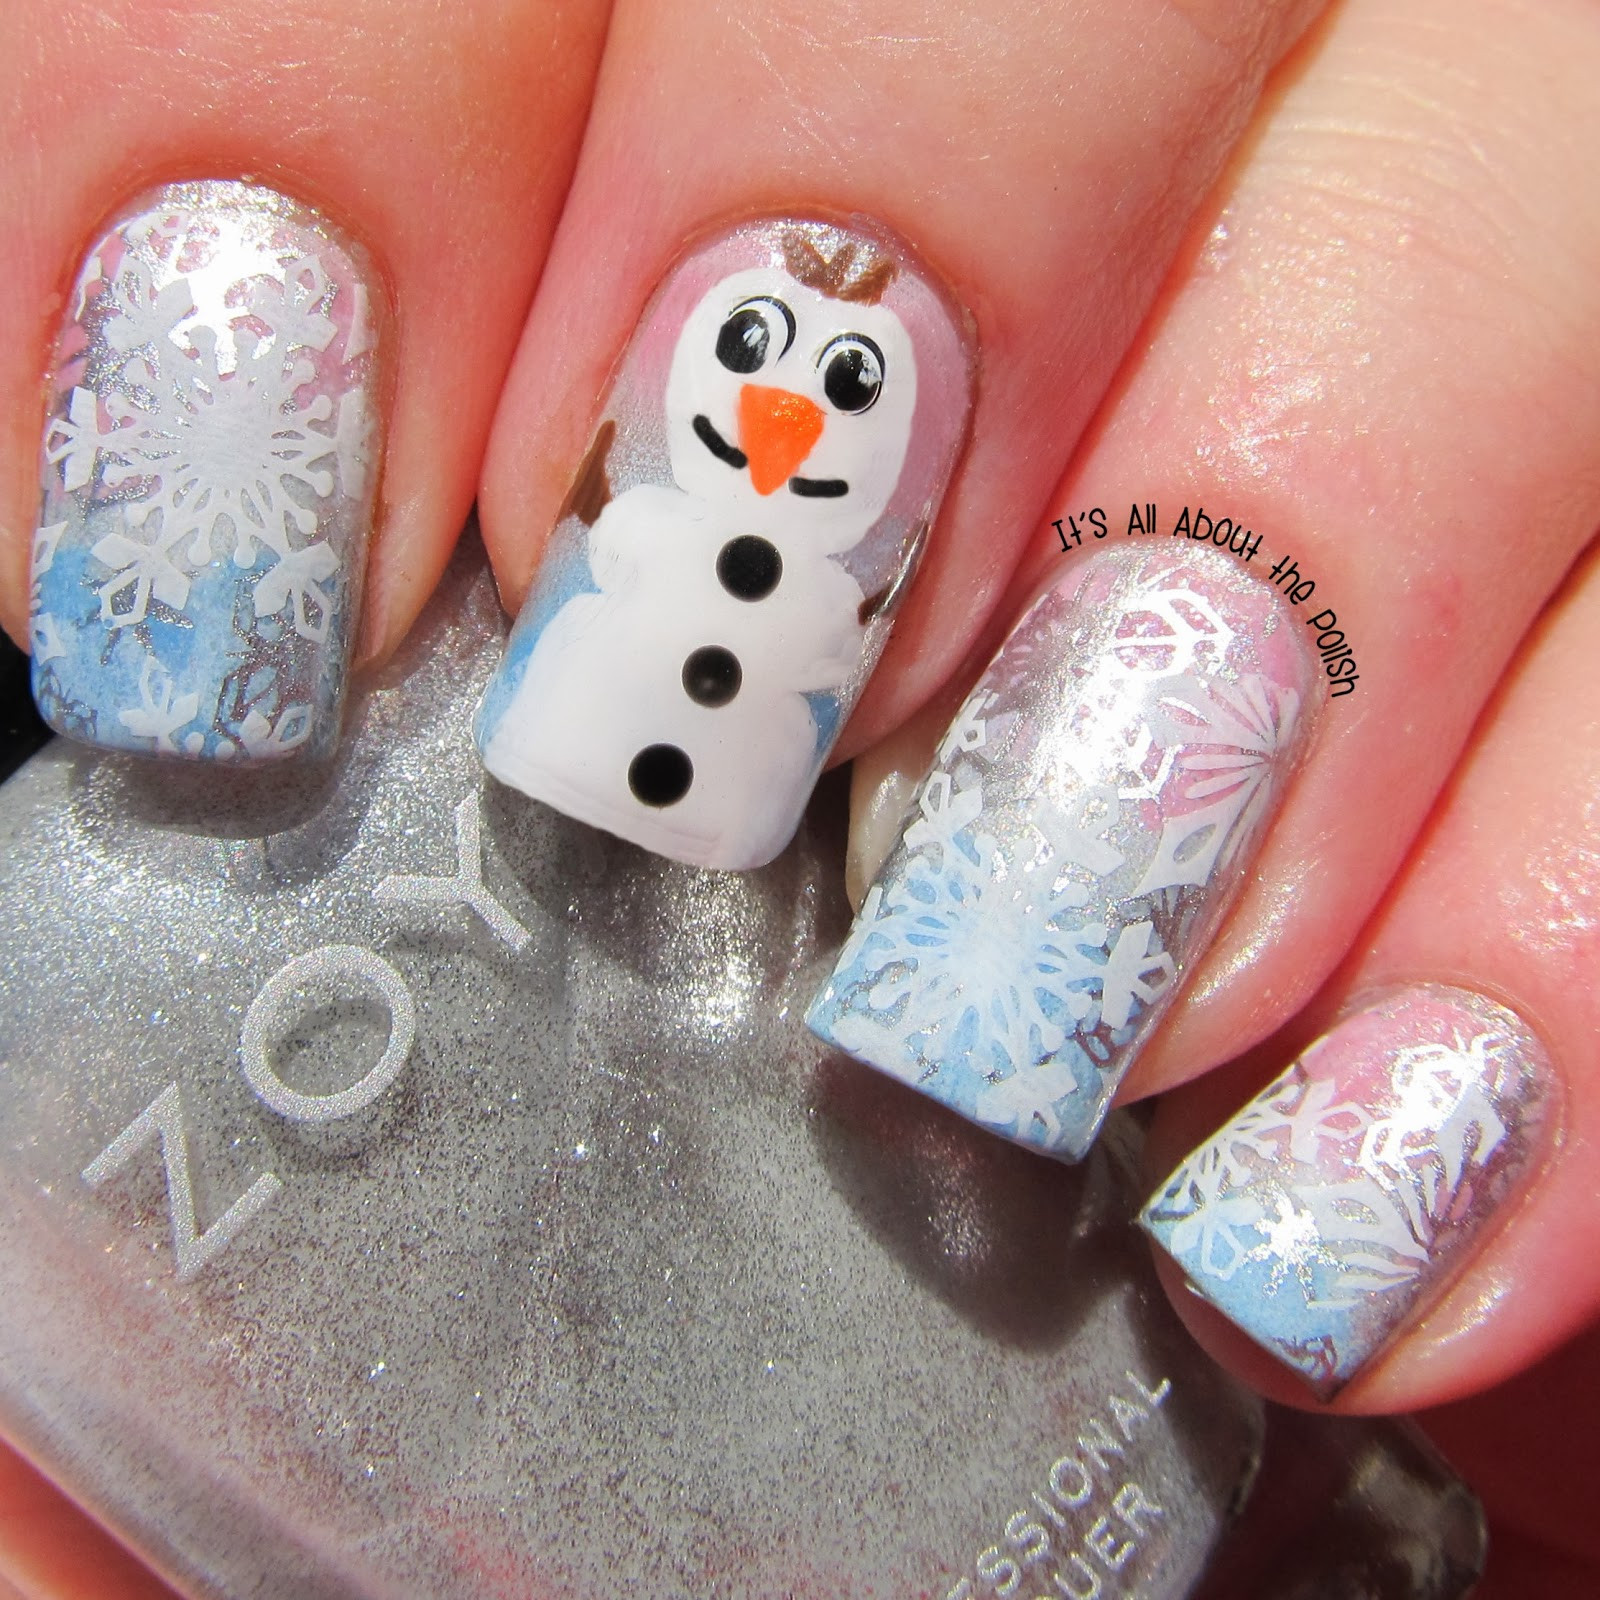 Olaf Nail Designs
 It s all about the polish Frozen from Disney nail art Olaf